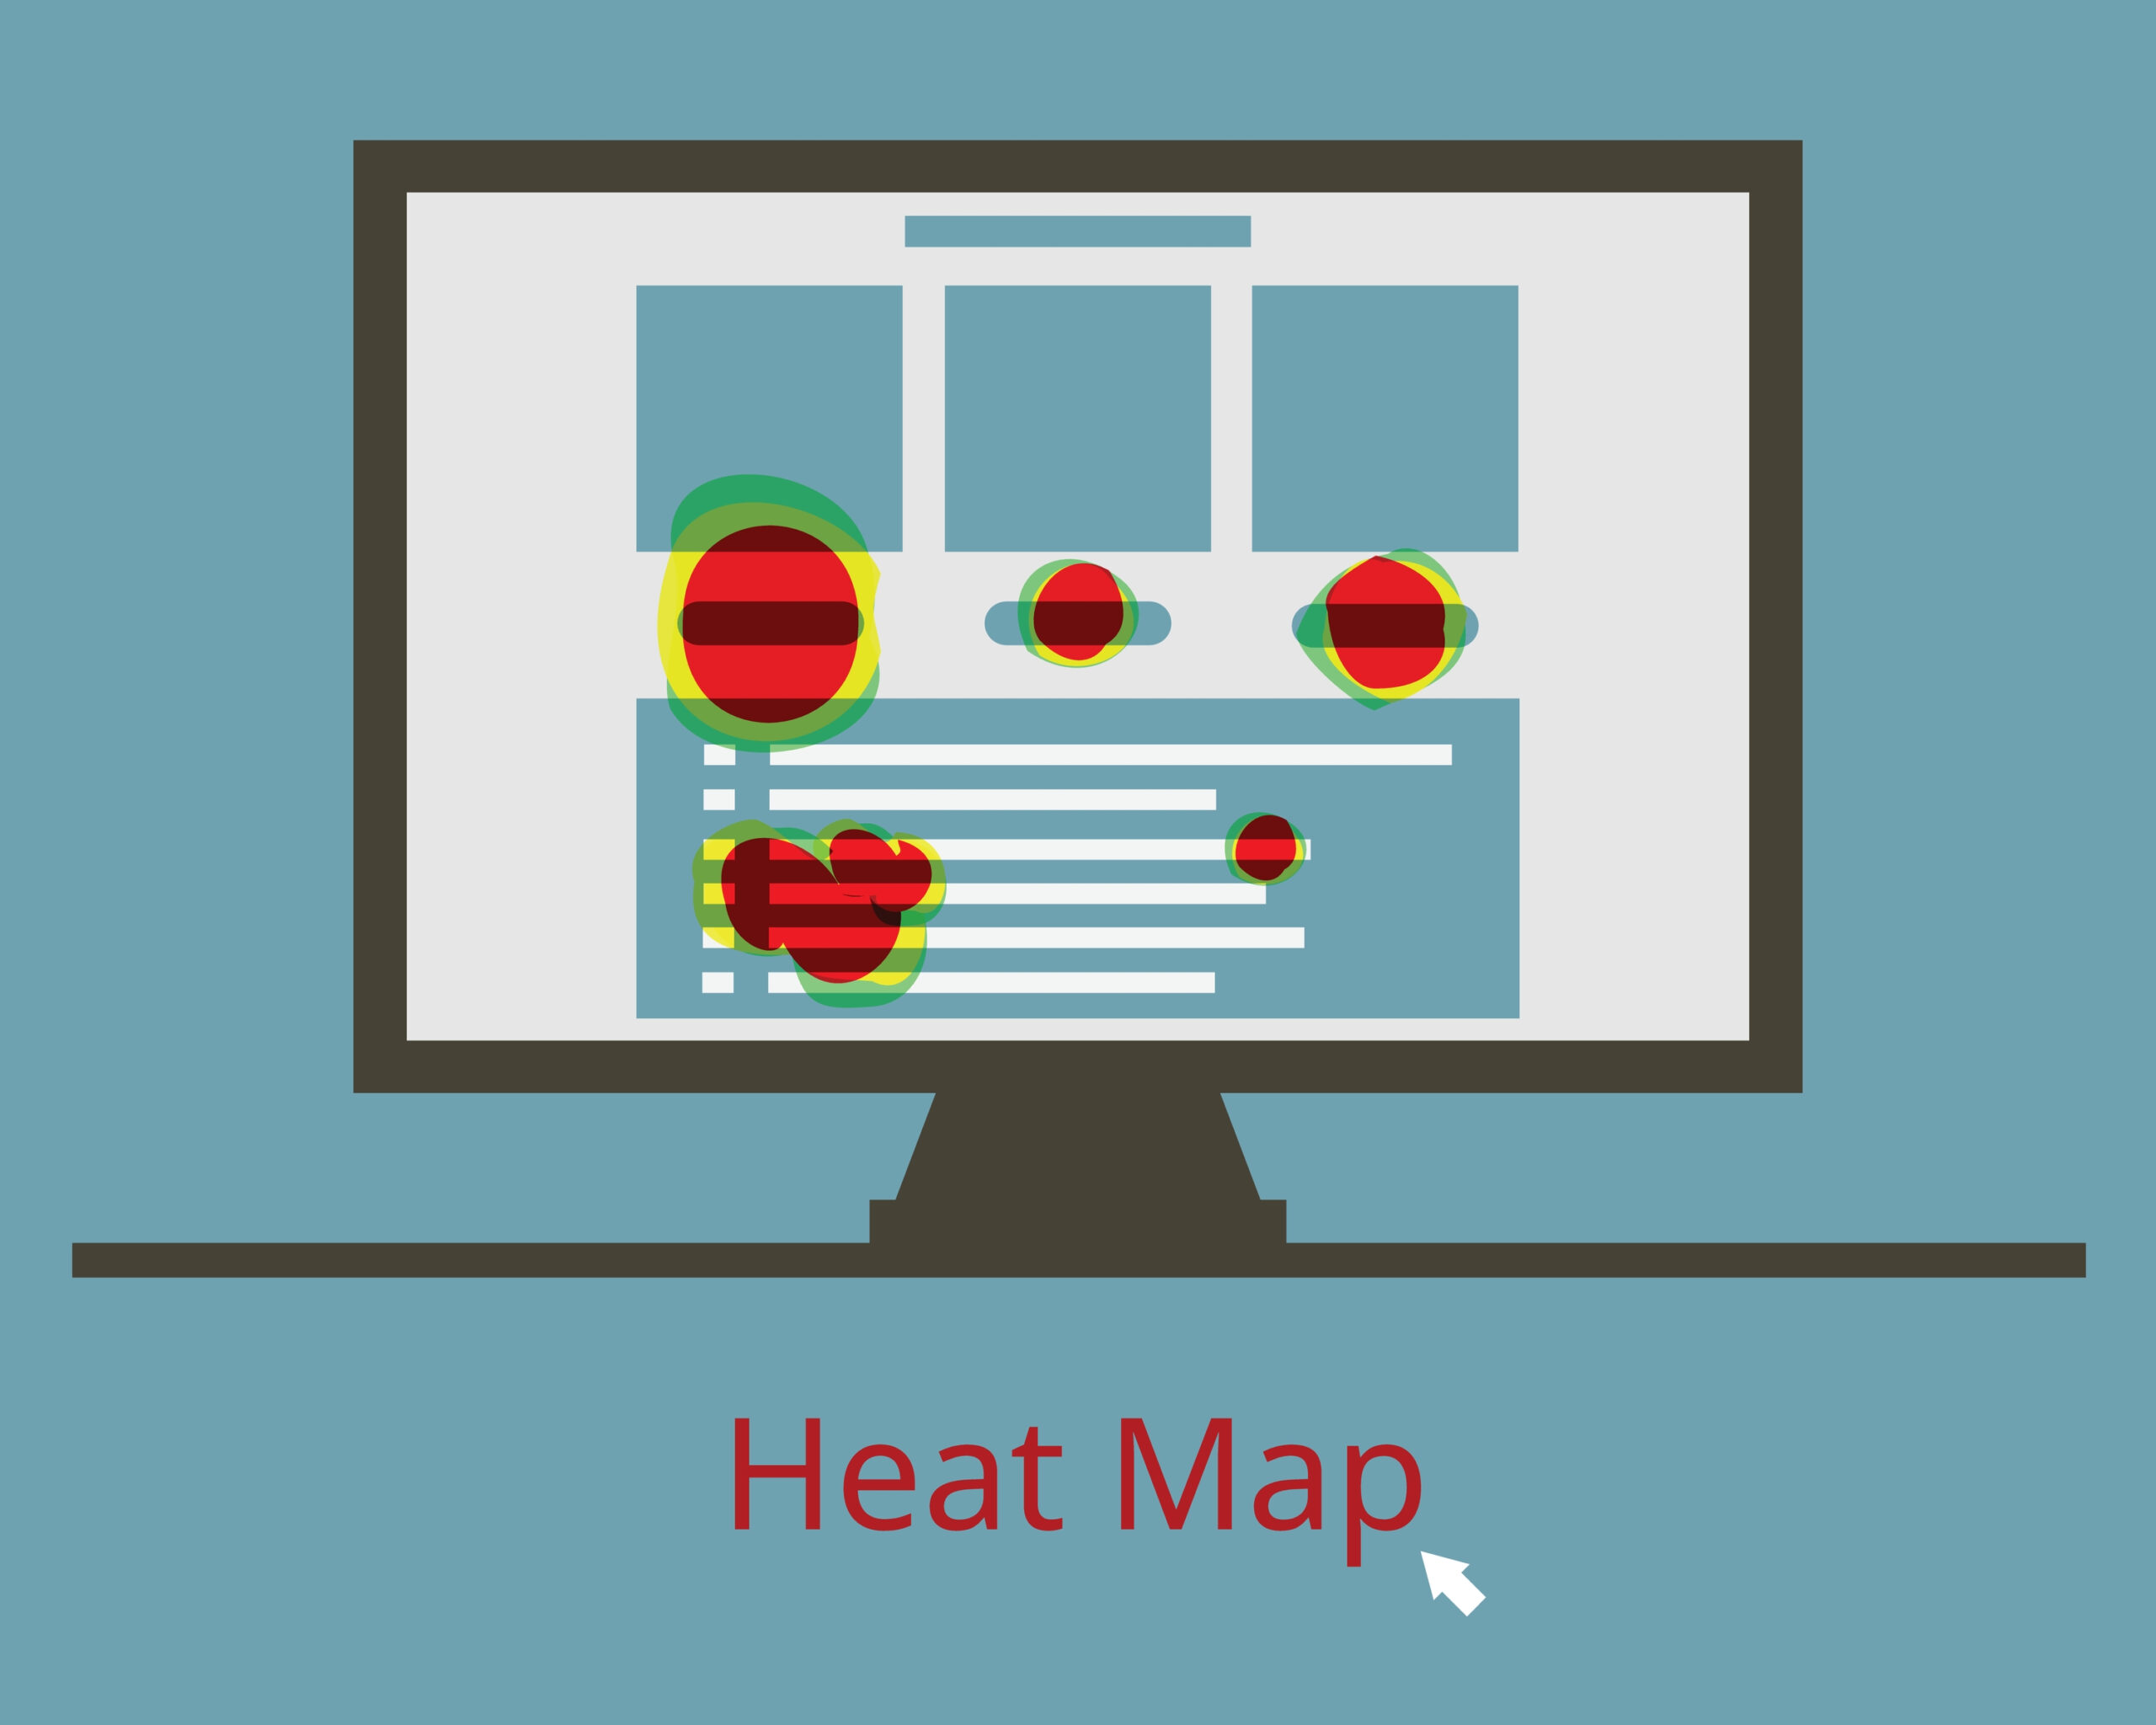 Geek insider, geekinsider, geekinsider. Com,, how to use the heat mapping tool, how to